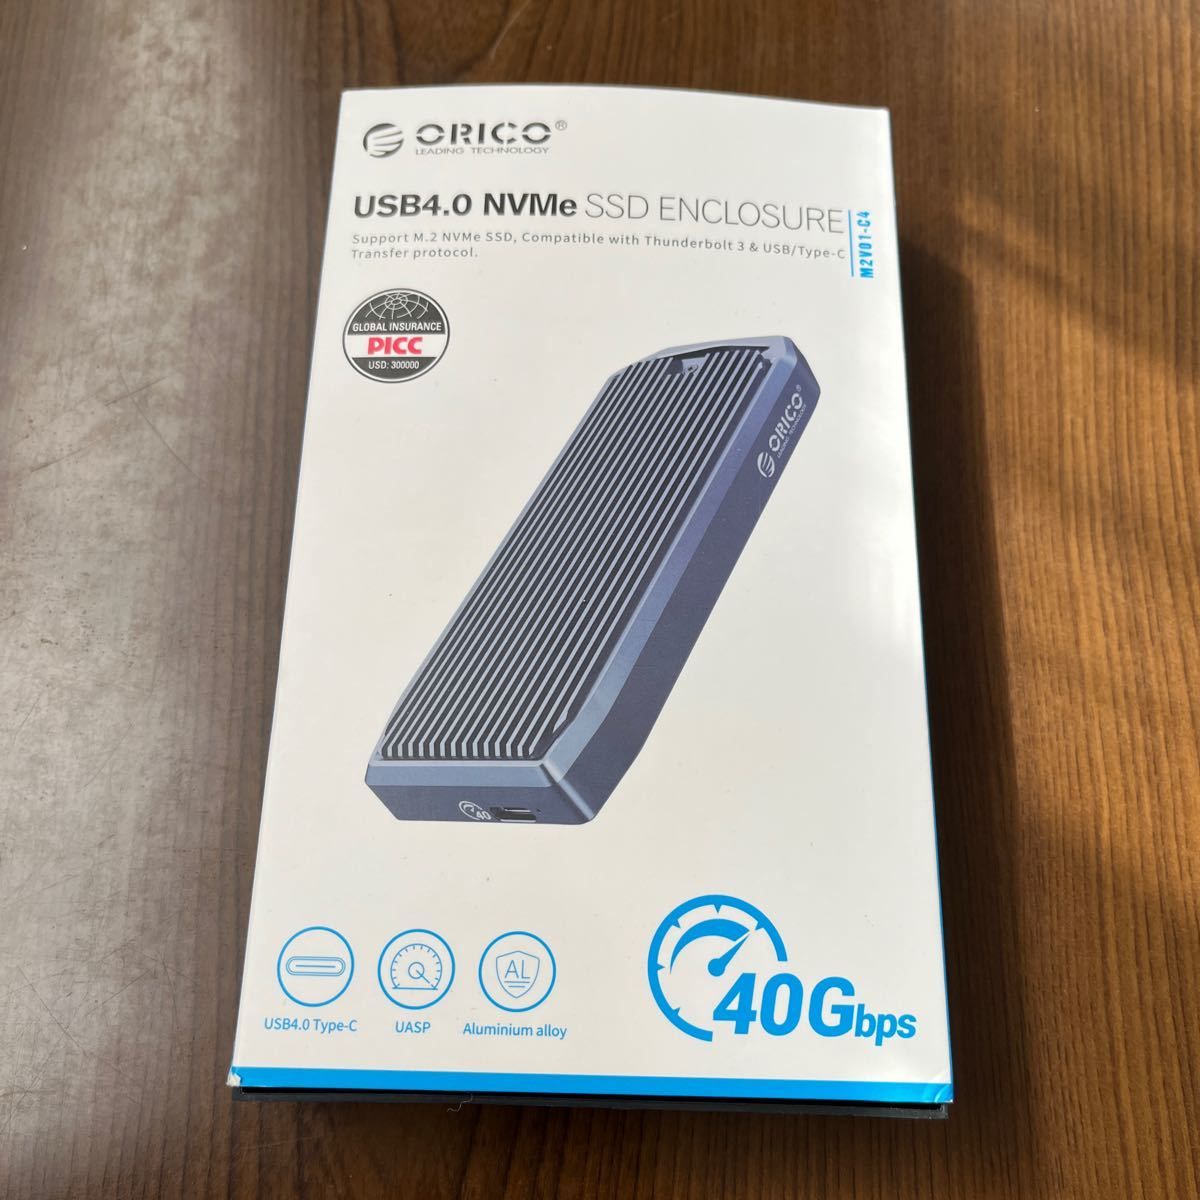 603p0107☆ ORICO USB4.0 Nvme M.2 SSDケース 40Gbps超高速 [最大読み込み：2700MB/S 最大書き込み：1400MB/S] 